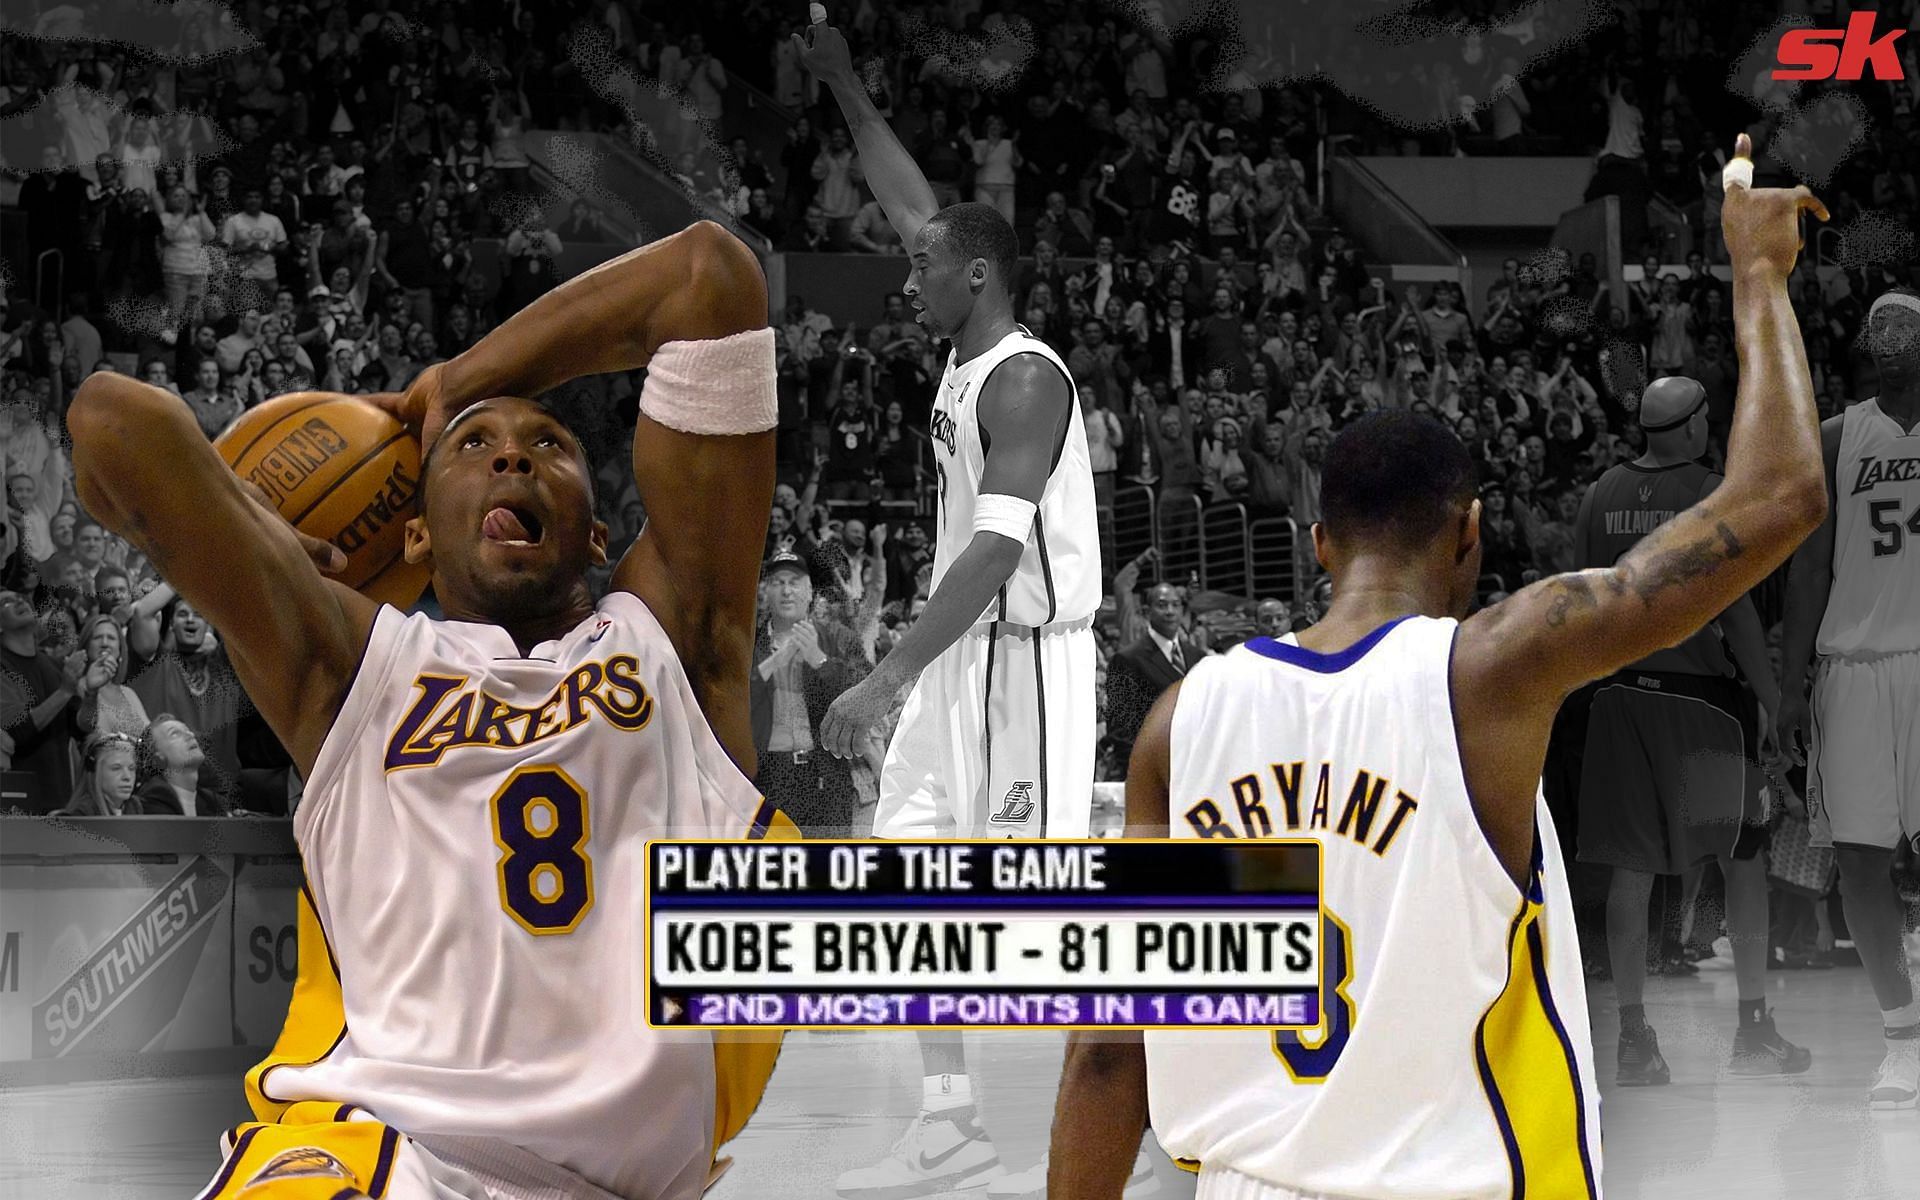 Kobe Bryant scored 81 points against the Raptors on this day 16 years ago